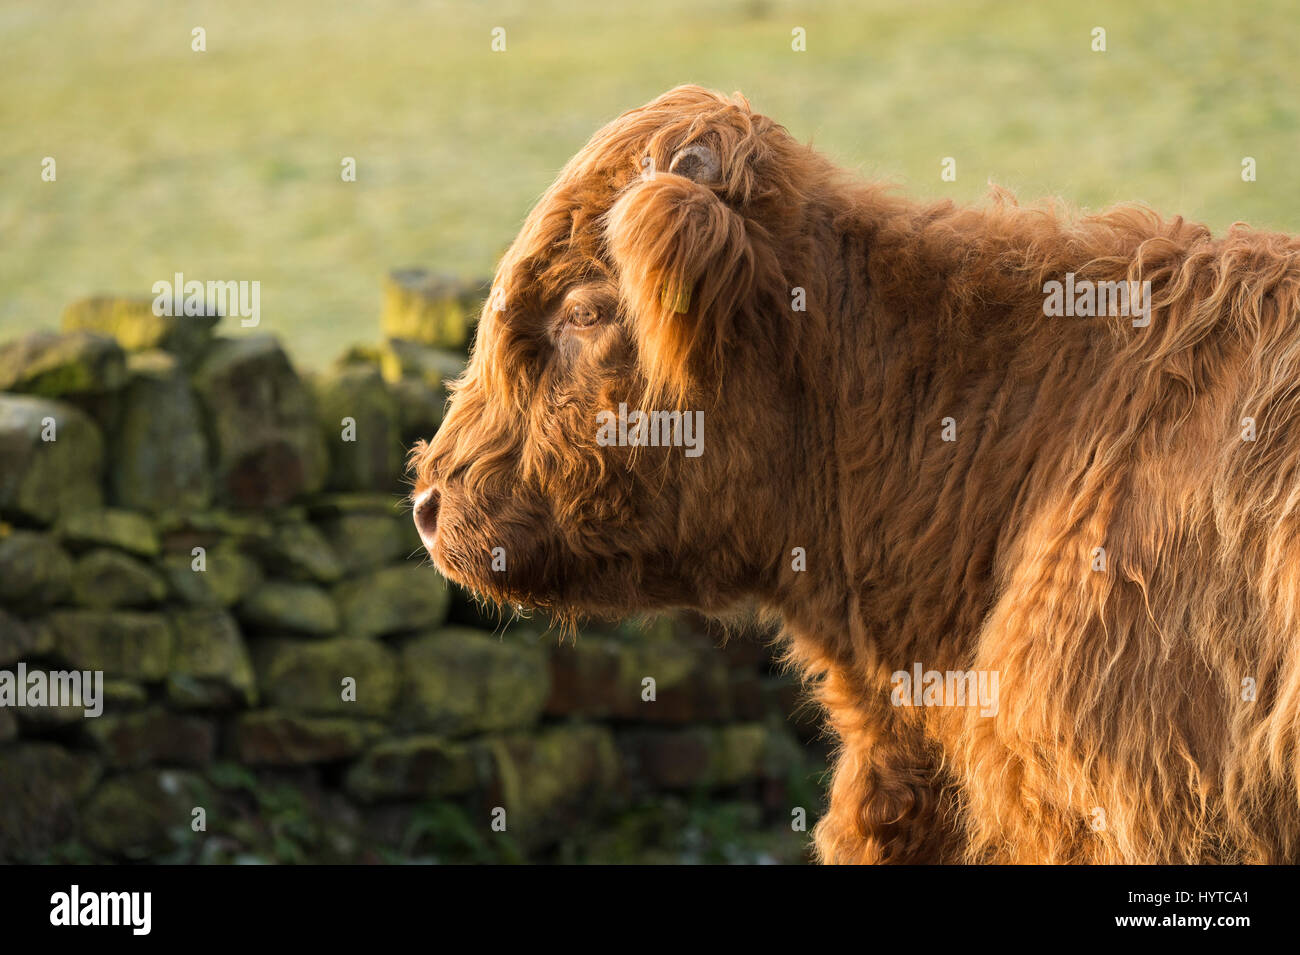 Close-up profile of the head and neck of sunlit, shaggy, red Highland cattle calf in a farm field. 1 tiny sprouting horn is visible. England, GB, UK. Stock Photo